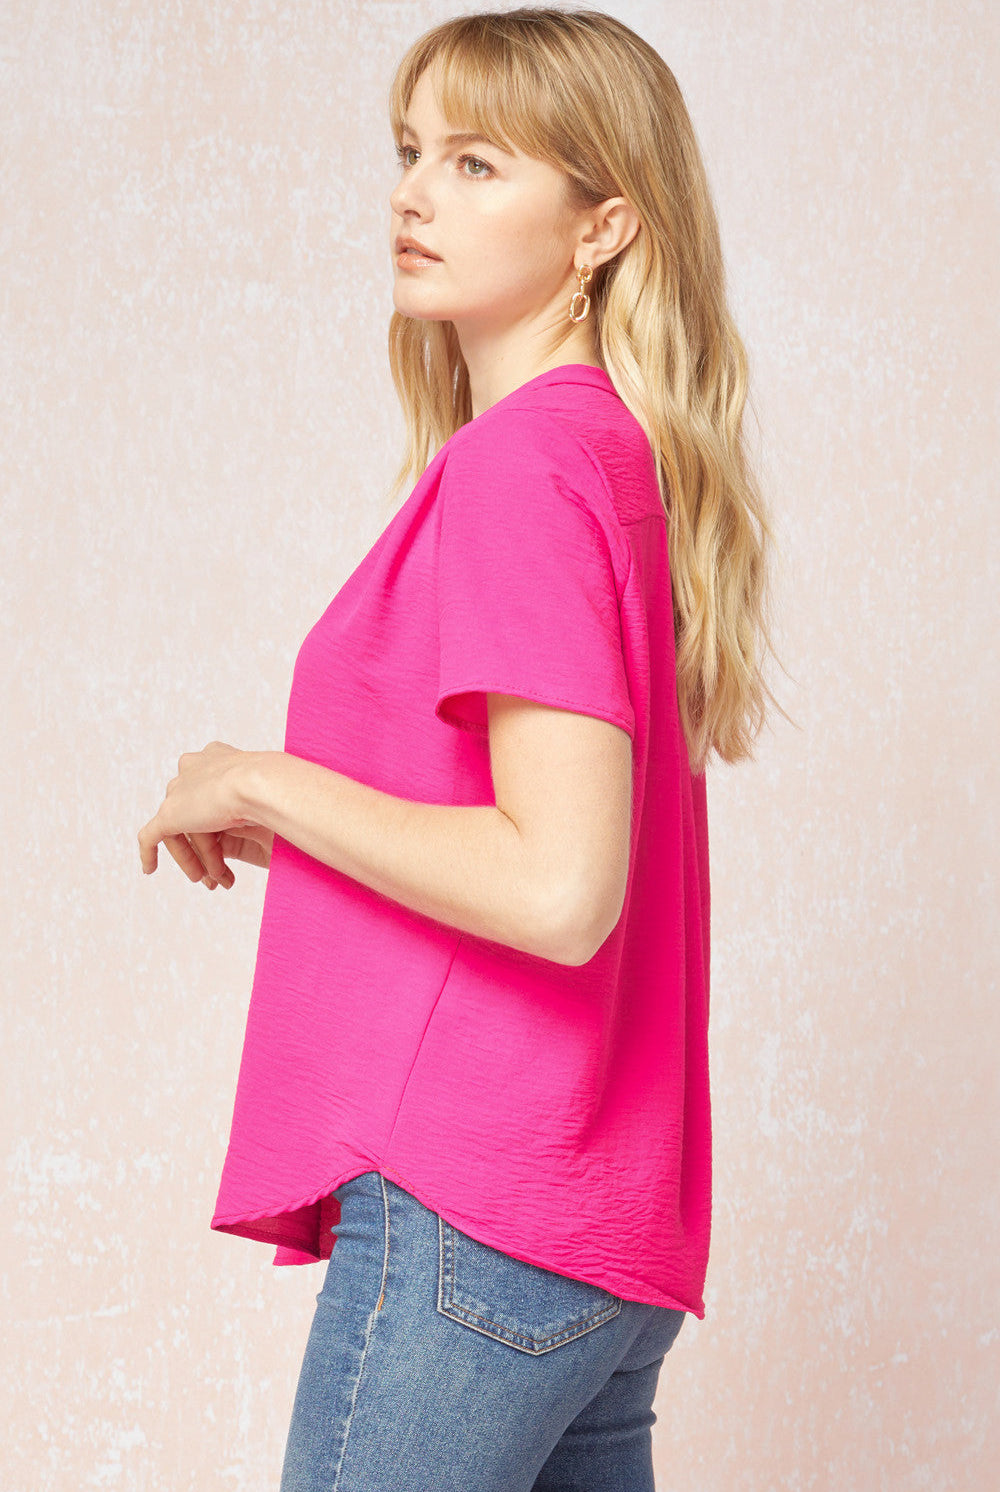 harmony top hot pink entro apex ethical womens boutique